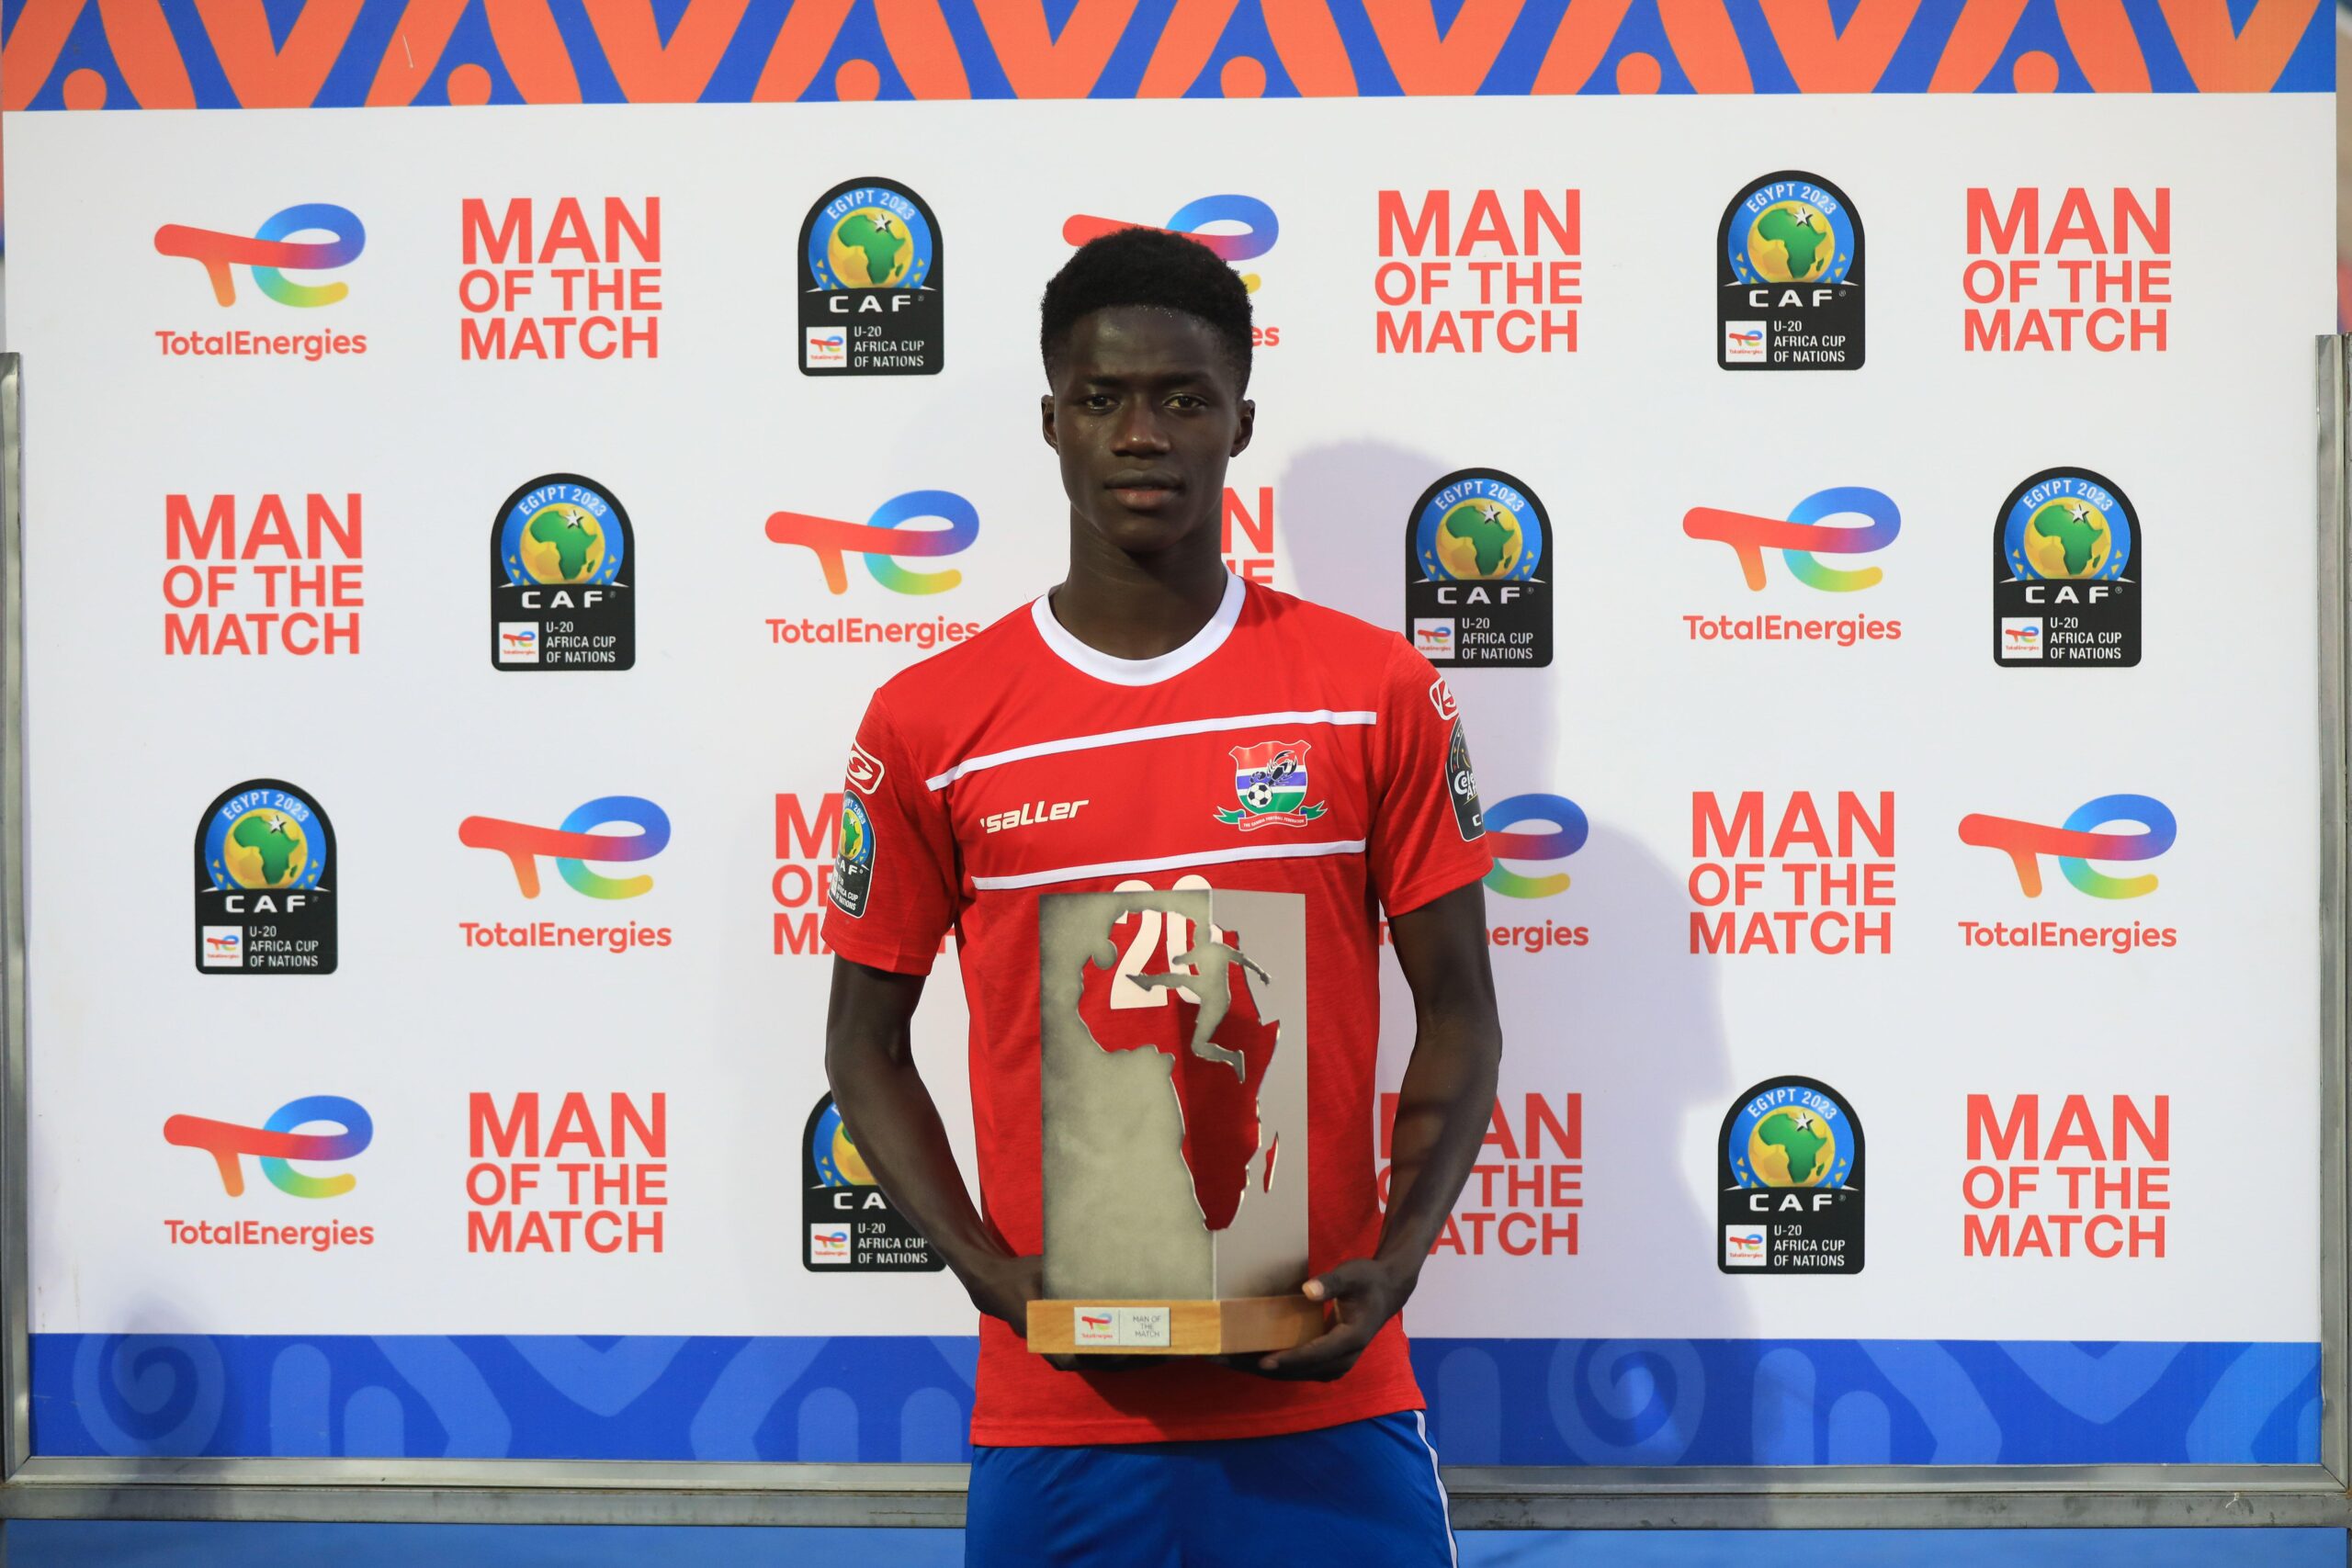 2P17KD0 Egypt, Alexandria 03 March 2023 - Adama Bojang of The Gambia with man of the match trophy after the Quarter Final match between Gambia Under 20 and South Sudan Under 20 of TotalEnergies Under 20 Africa Cup of Nations Egypt 2023 and qualify play off for FIFA under 20 World Cup 2023 in Indonesia. Haras El-Hodod Stadium in Alexandria, Egypt, 2023. Photo SFSI Credit: Sebo47/Alamy Live News